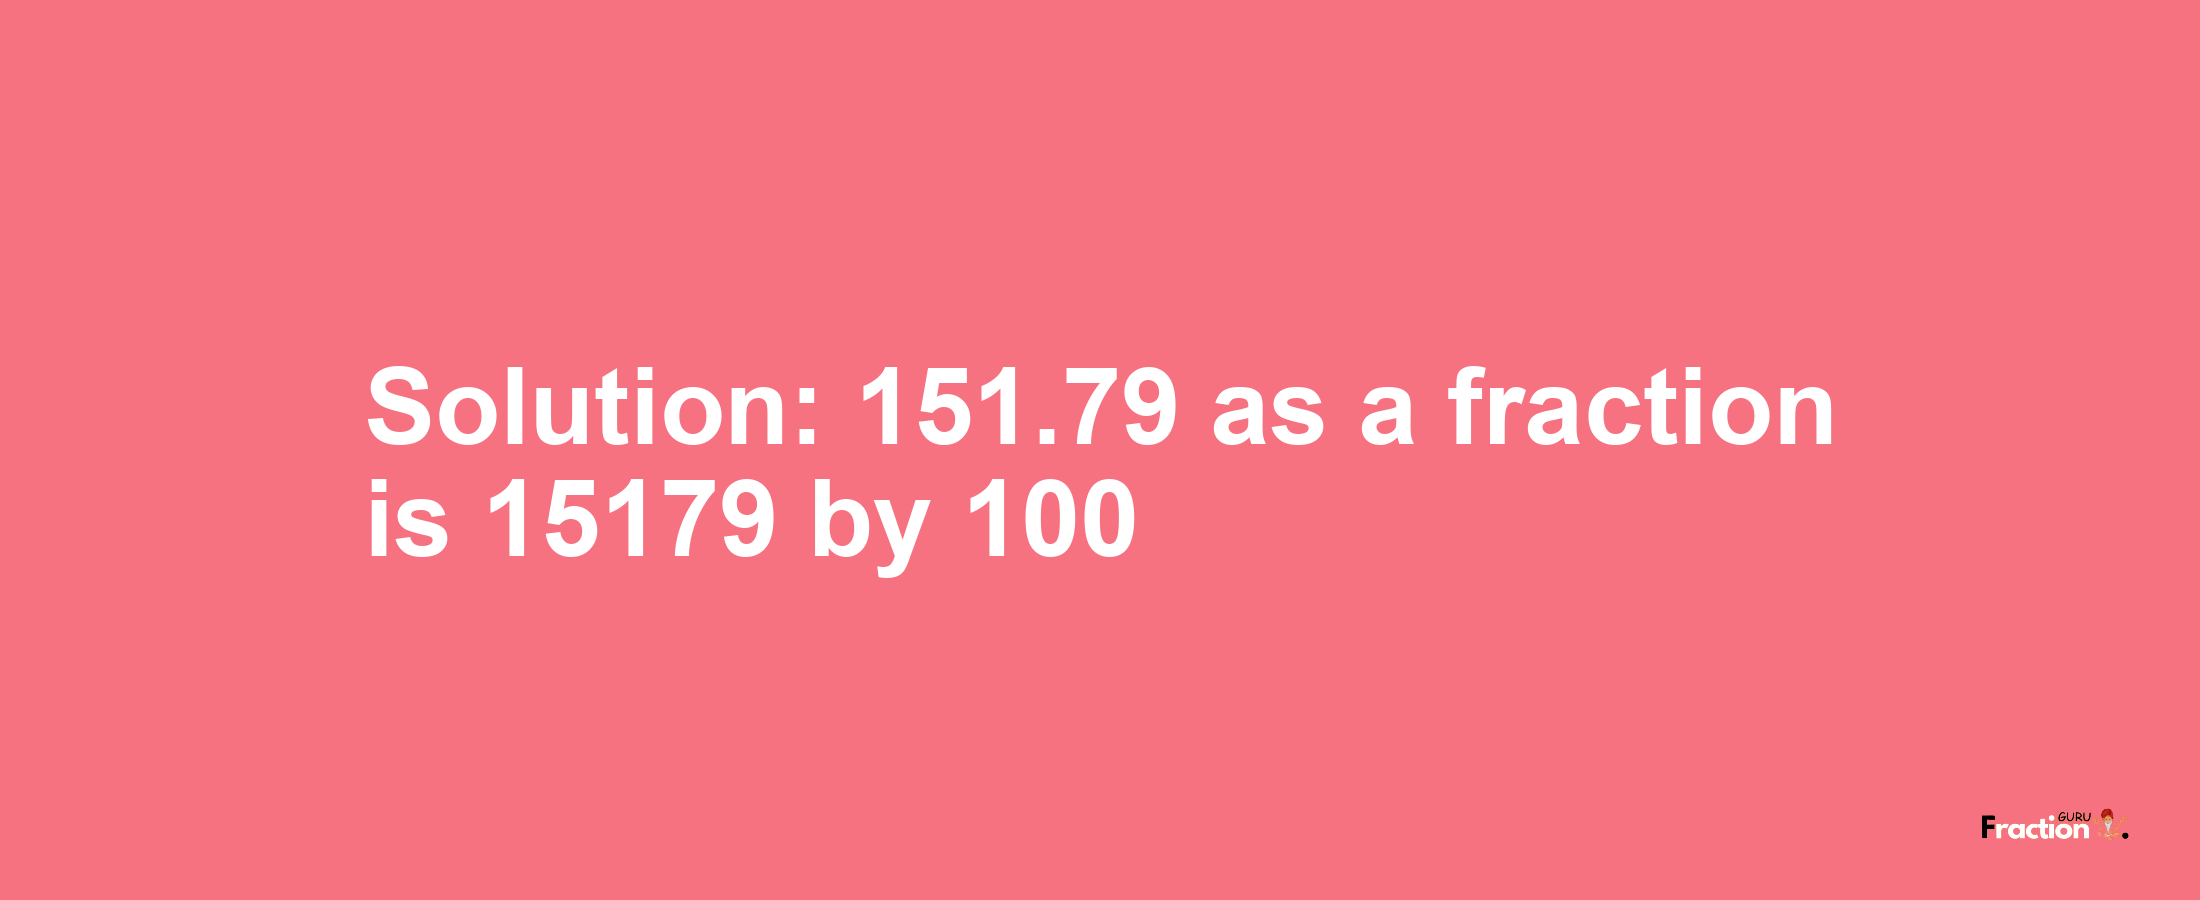 Solution:151.79 as a fraction is 15179/100